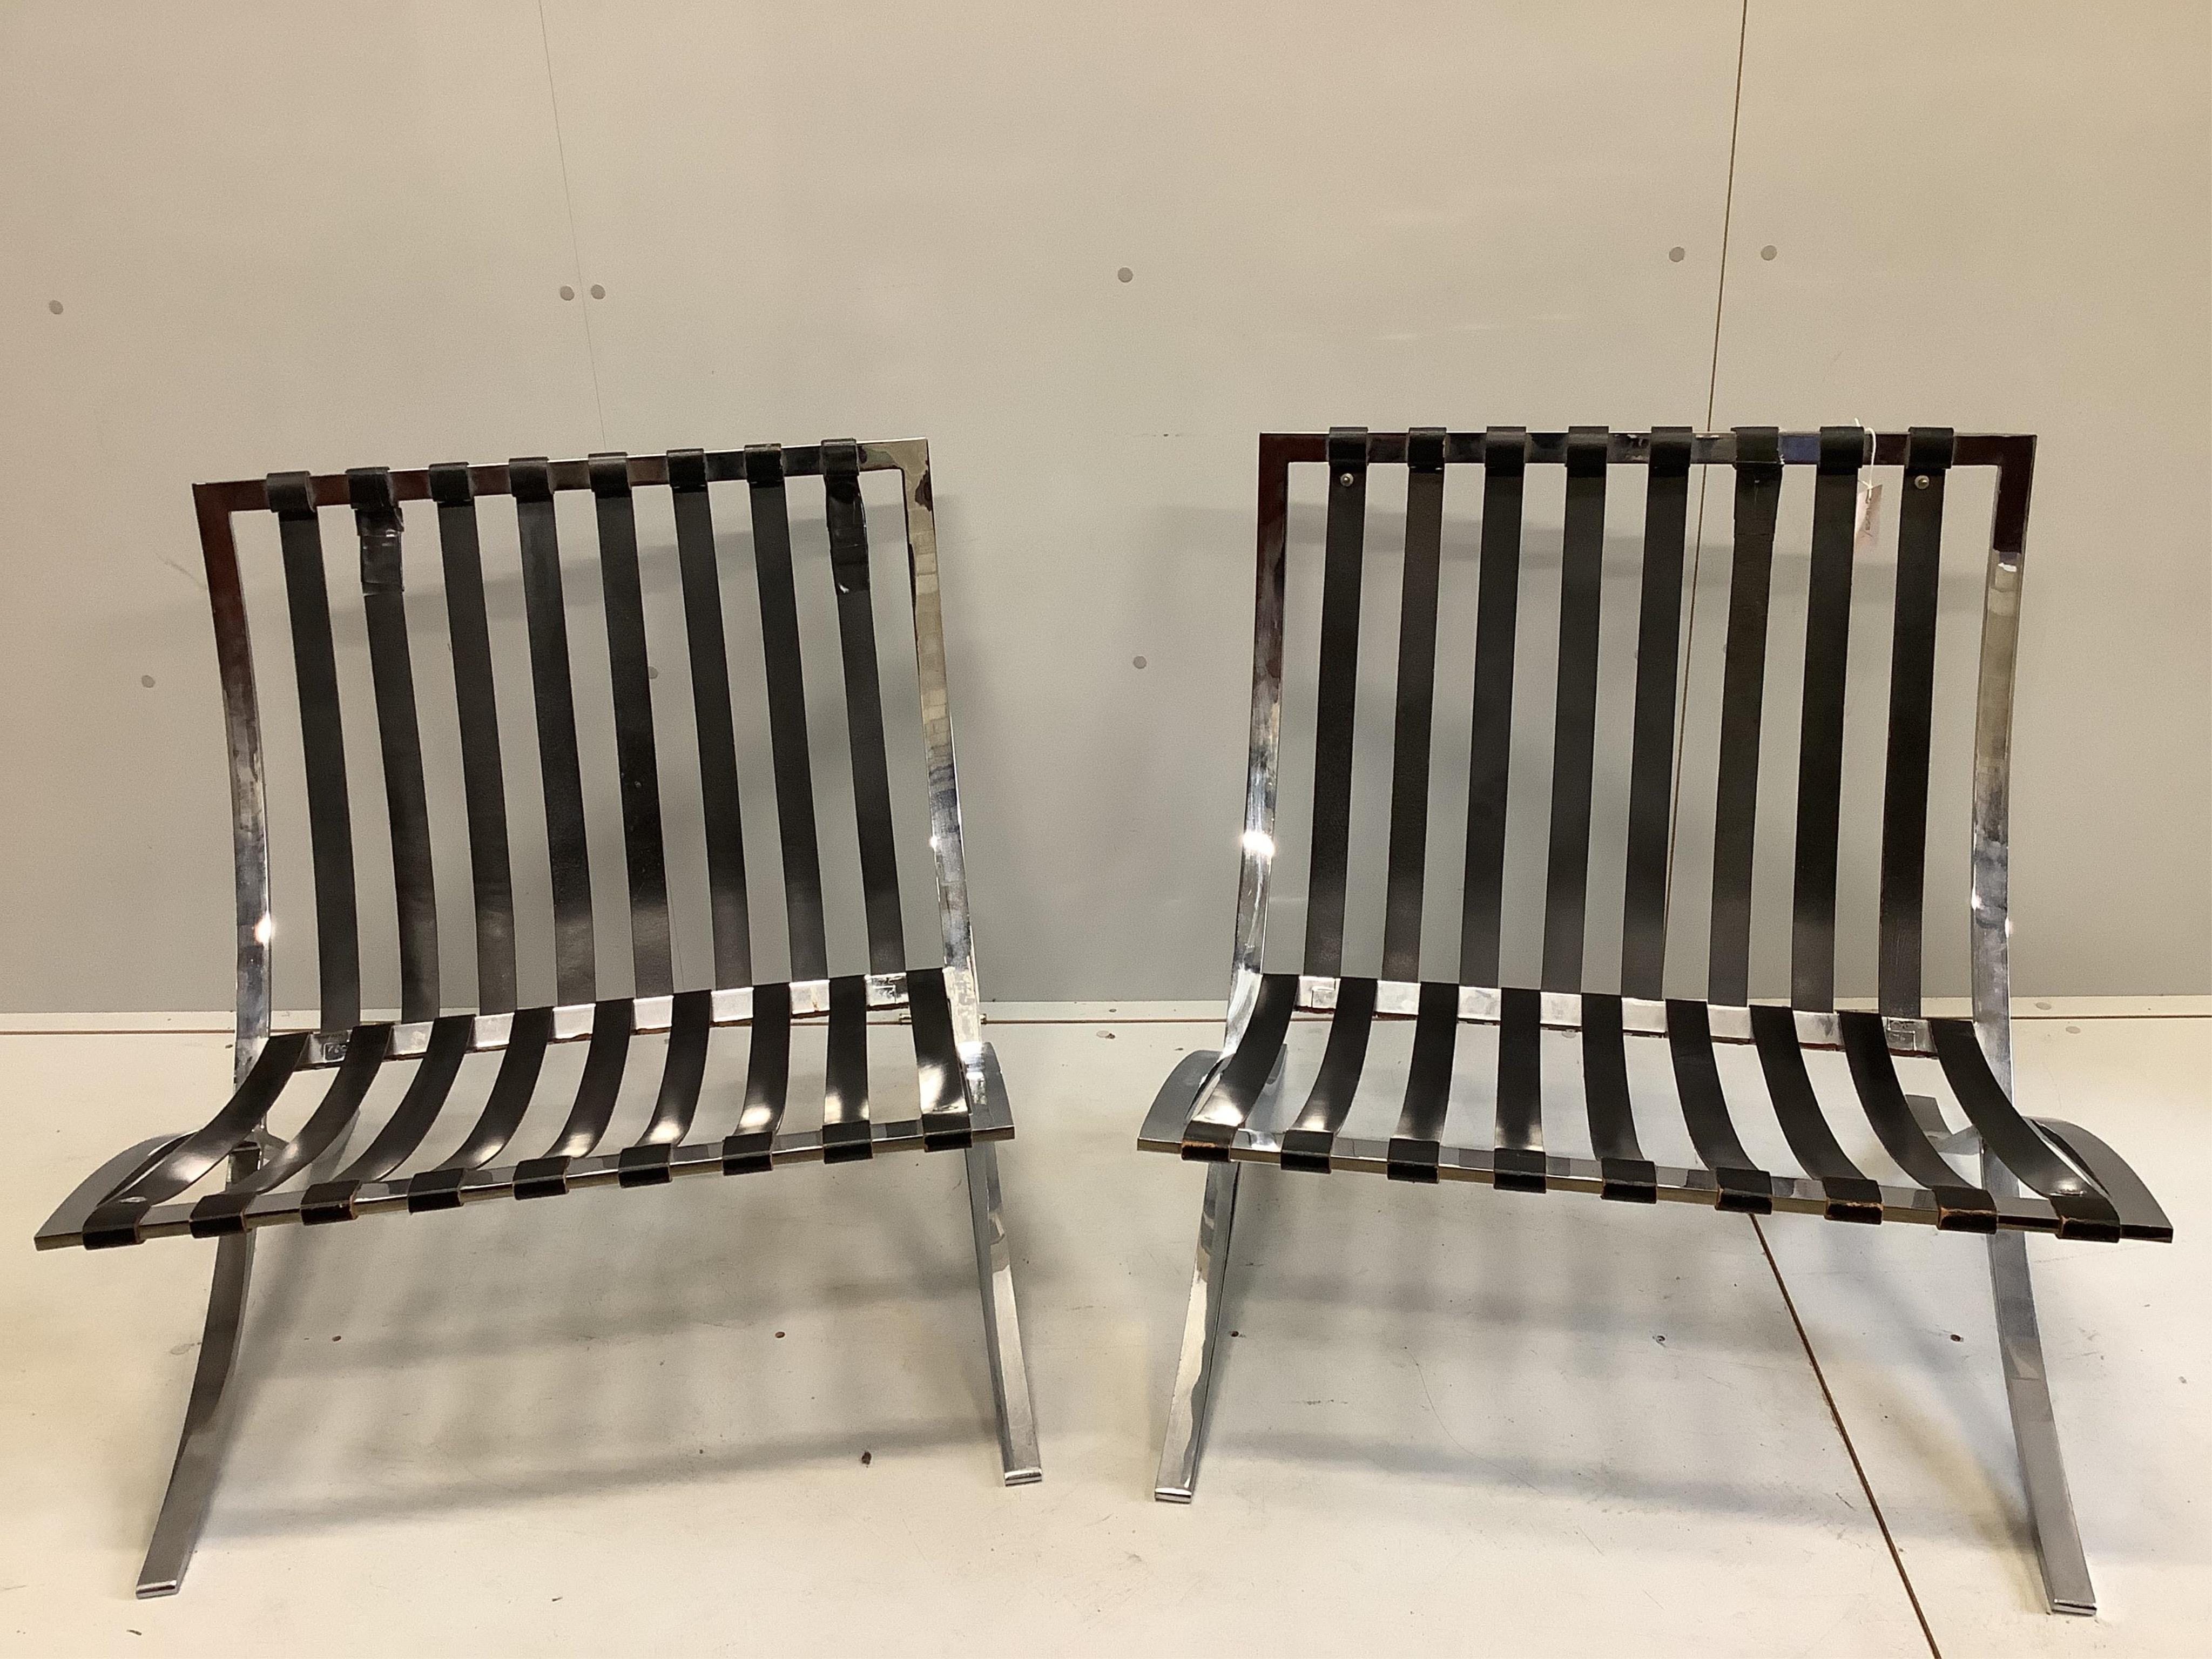 A pair of Barcelona chairs, width 75cm, depth 76cm, height 74cm